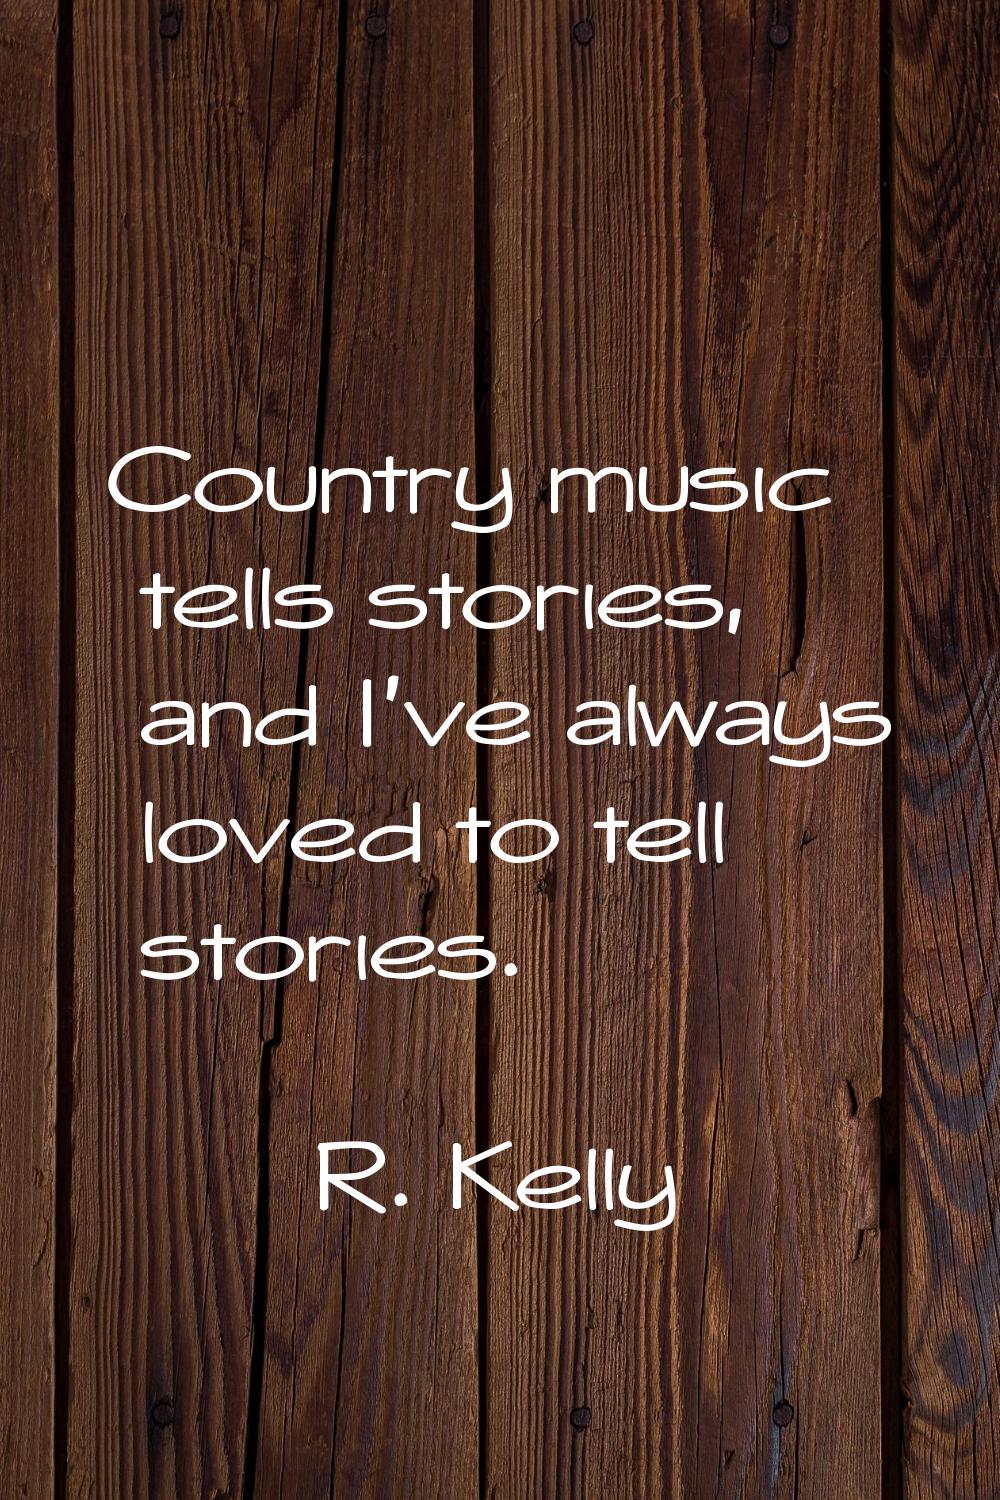 Country music tells stories, and I've always loved to tell stories.